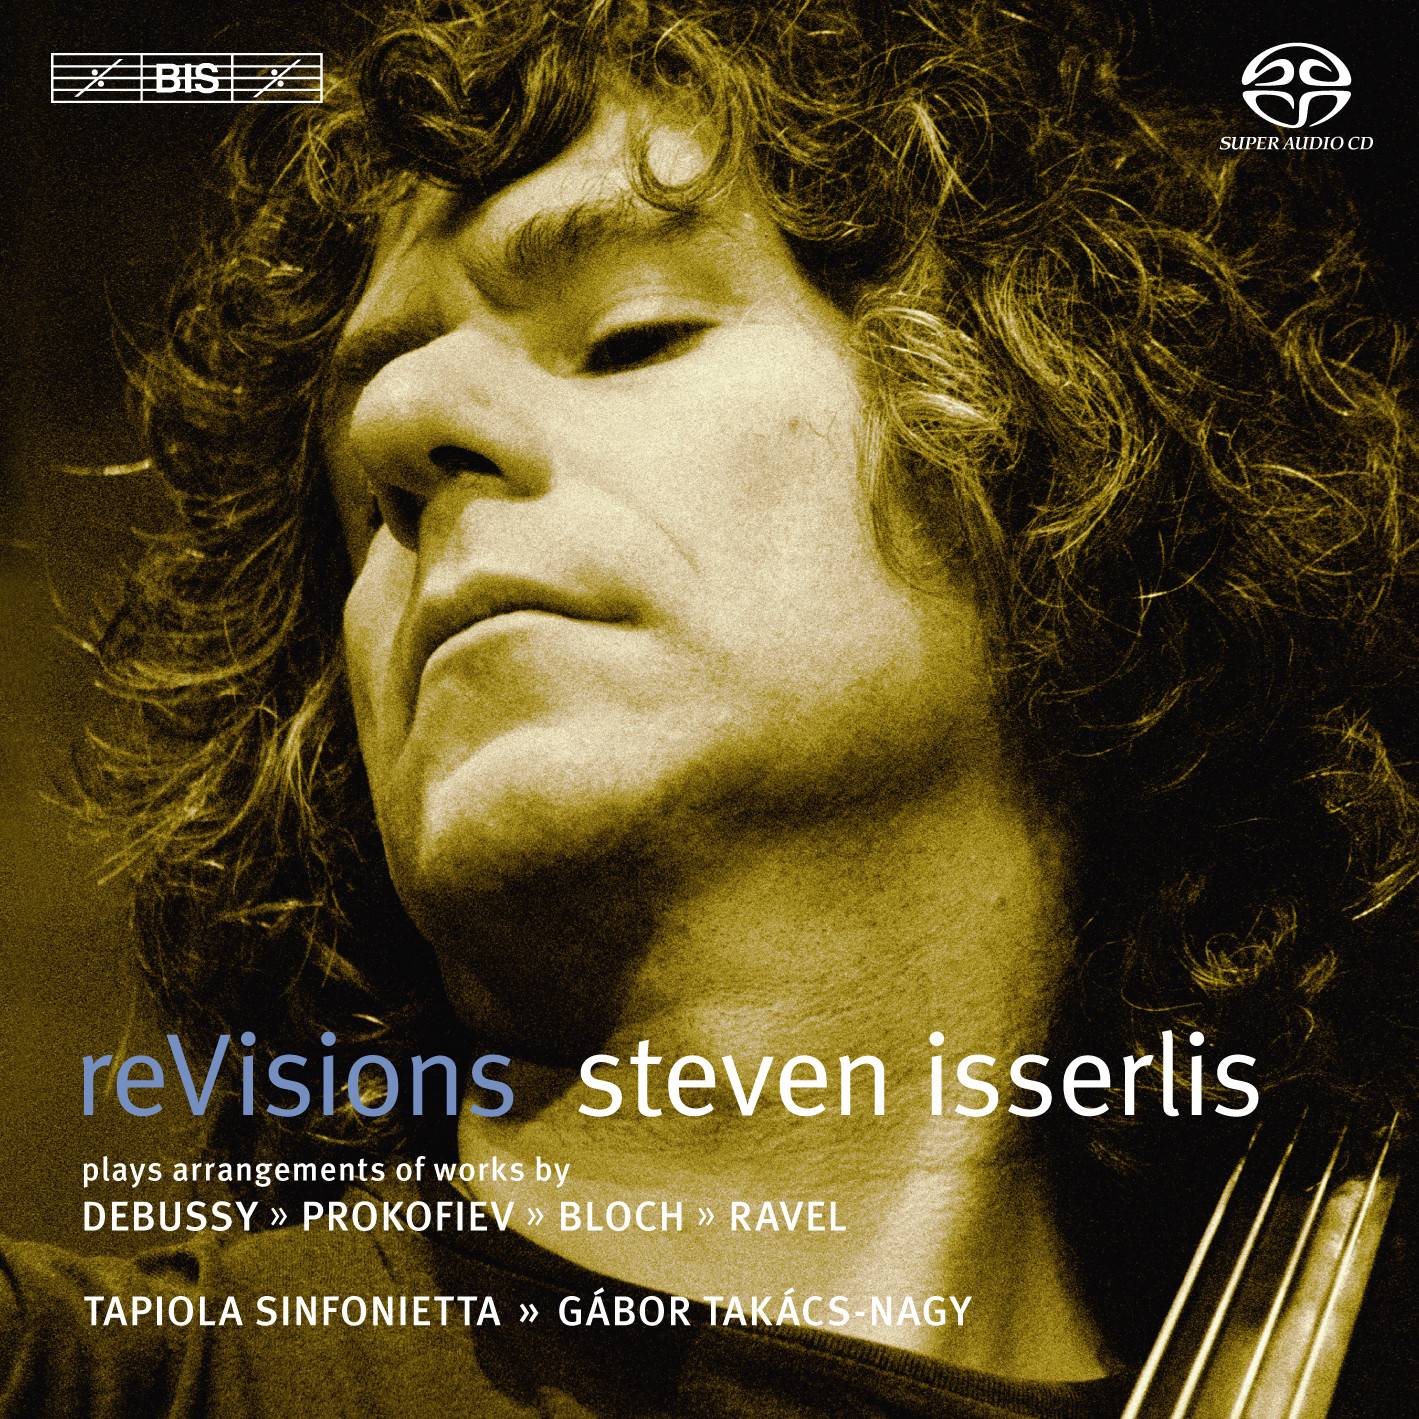 Steven Isserlis – Re-Visions (2010) MCH SACD ISO + Hi-Res FLAC